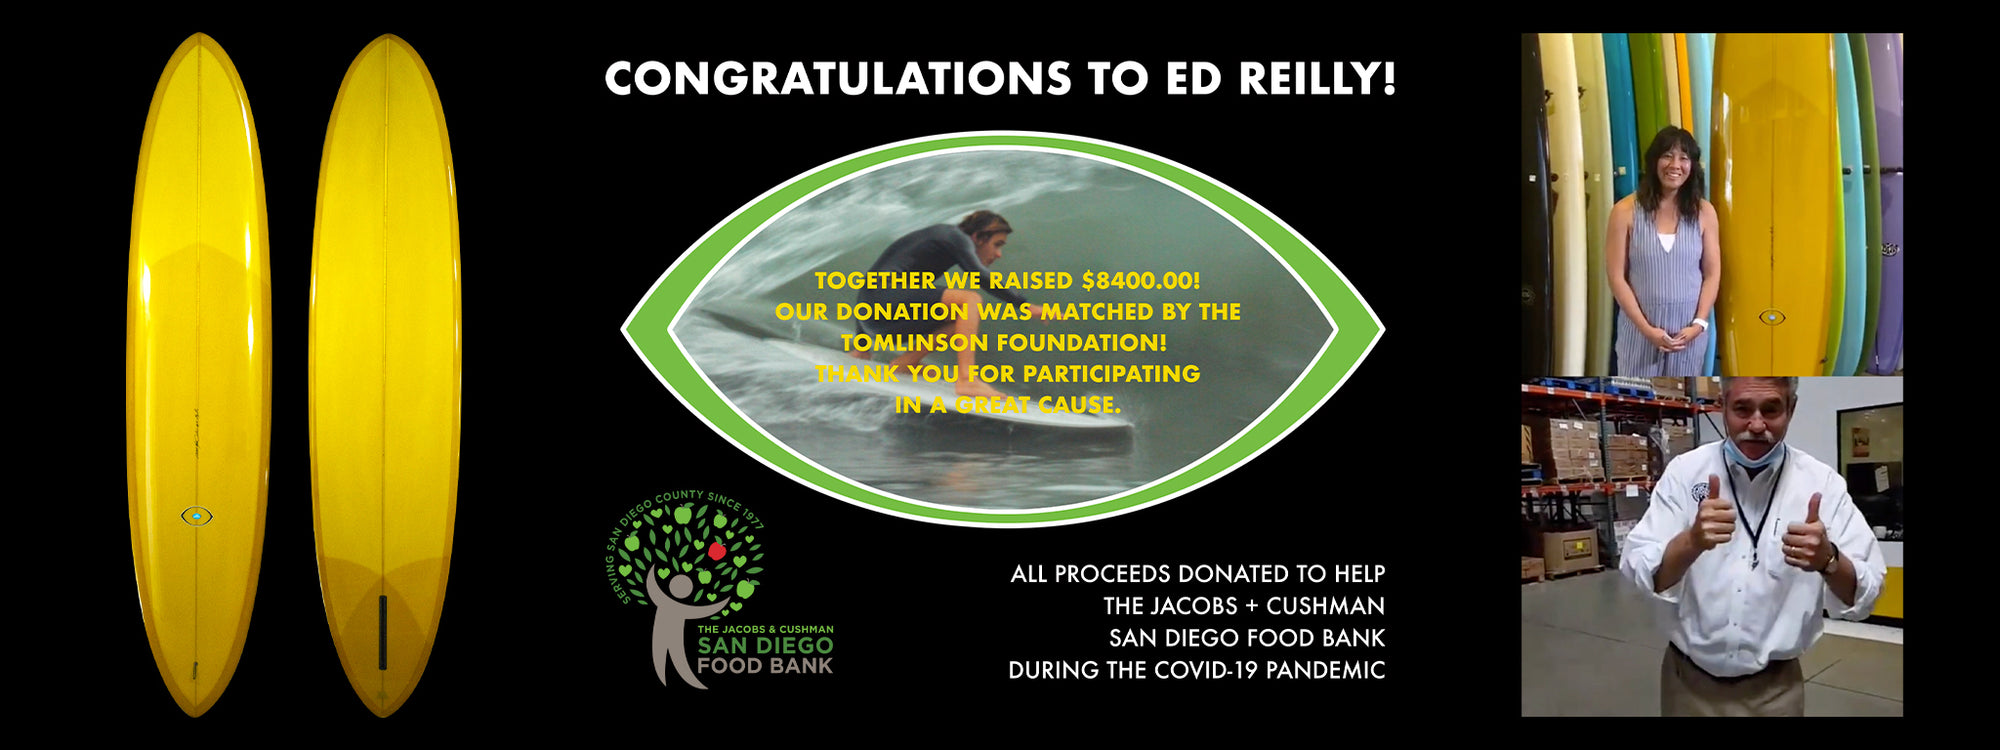 Congratulations to Ed Reilly for Winning the Bing Pig Performer!